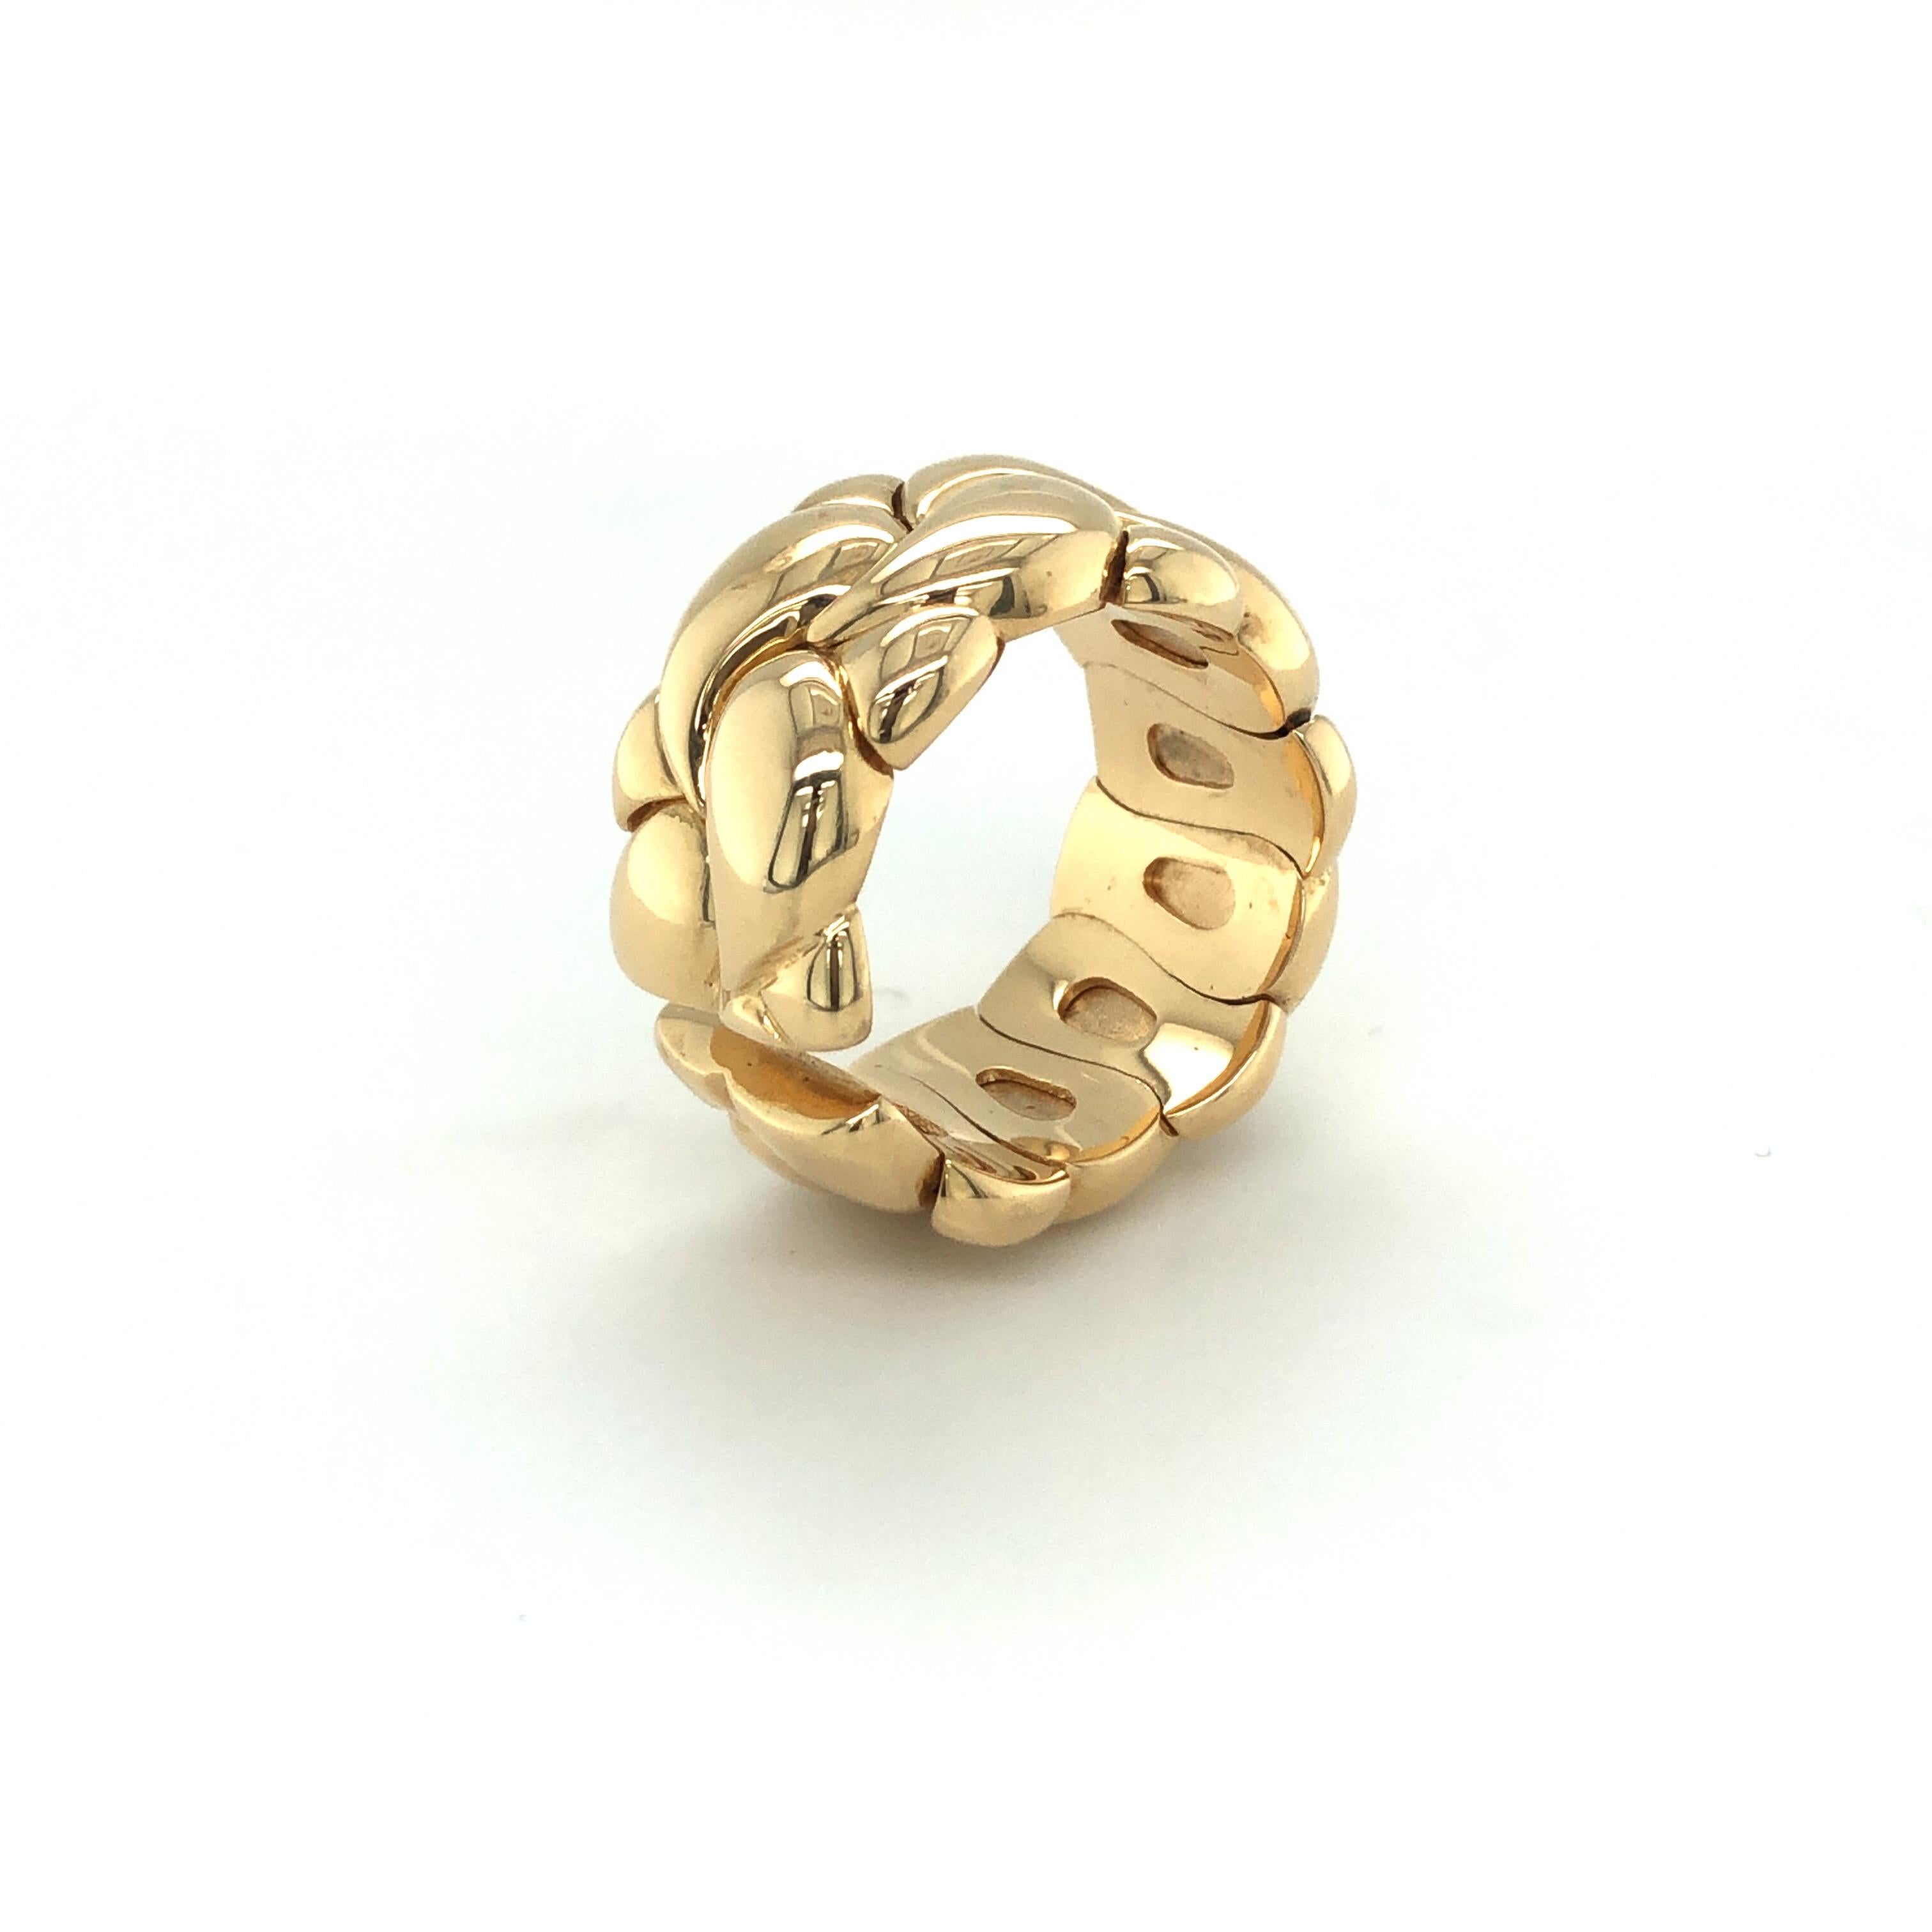 18 karat yellow gold Casmir ring by Chopard, 1990s. 
Broad band ring designed as a series of stylised paisley motifs. This elegant ring is very comfortable to wear due to its smooth surface.
The iconic jewels from the Casmir collection are